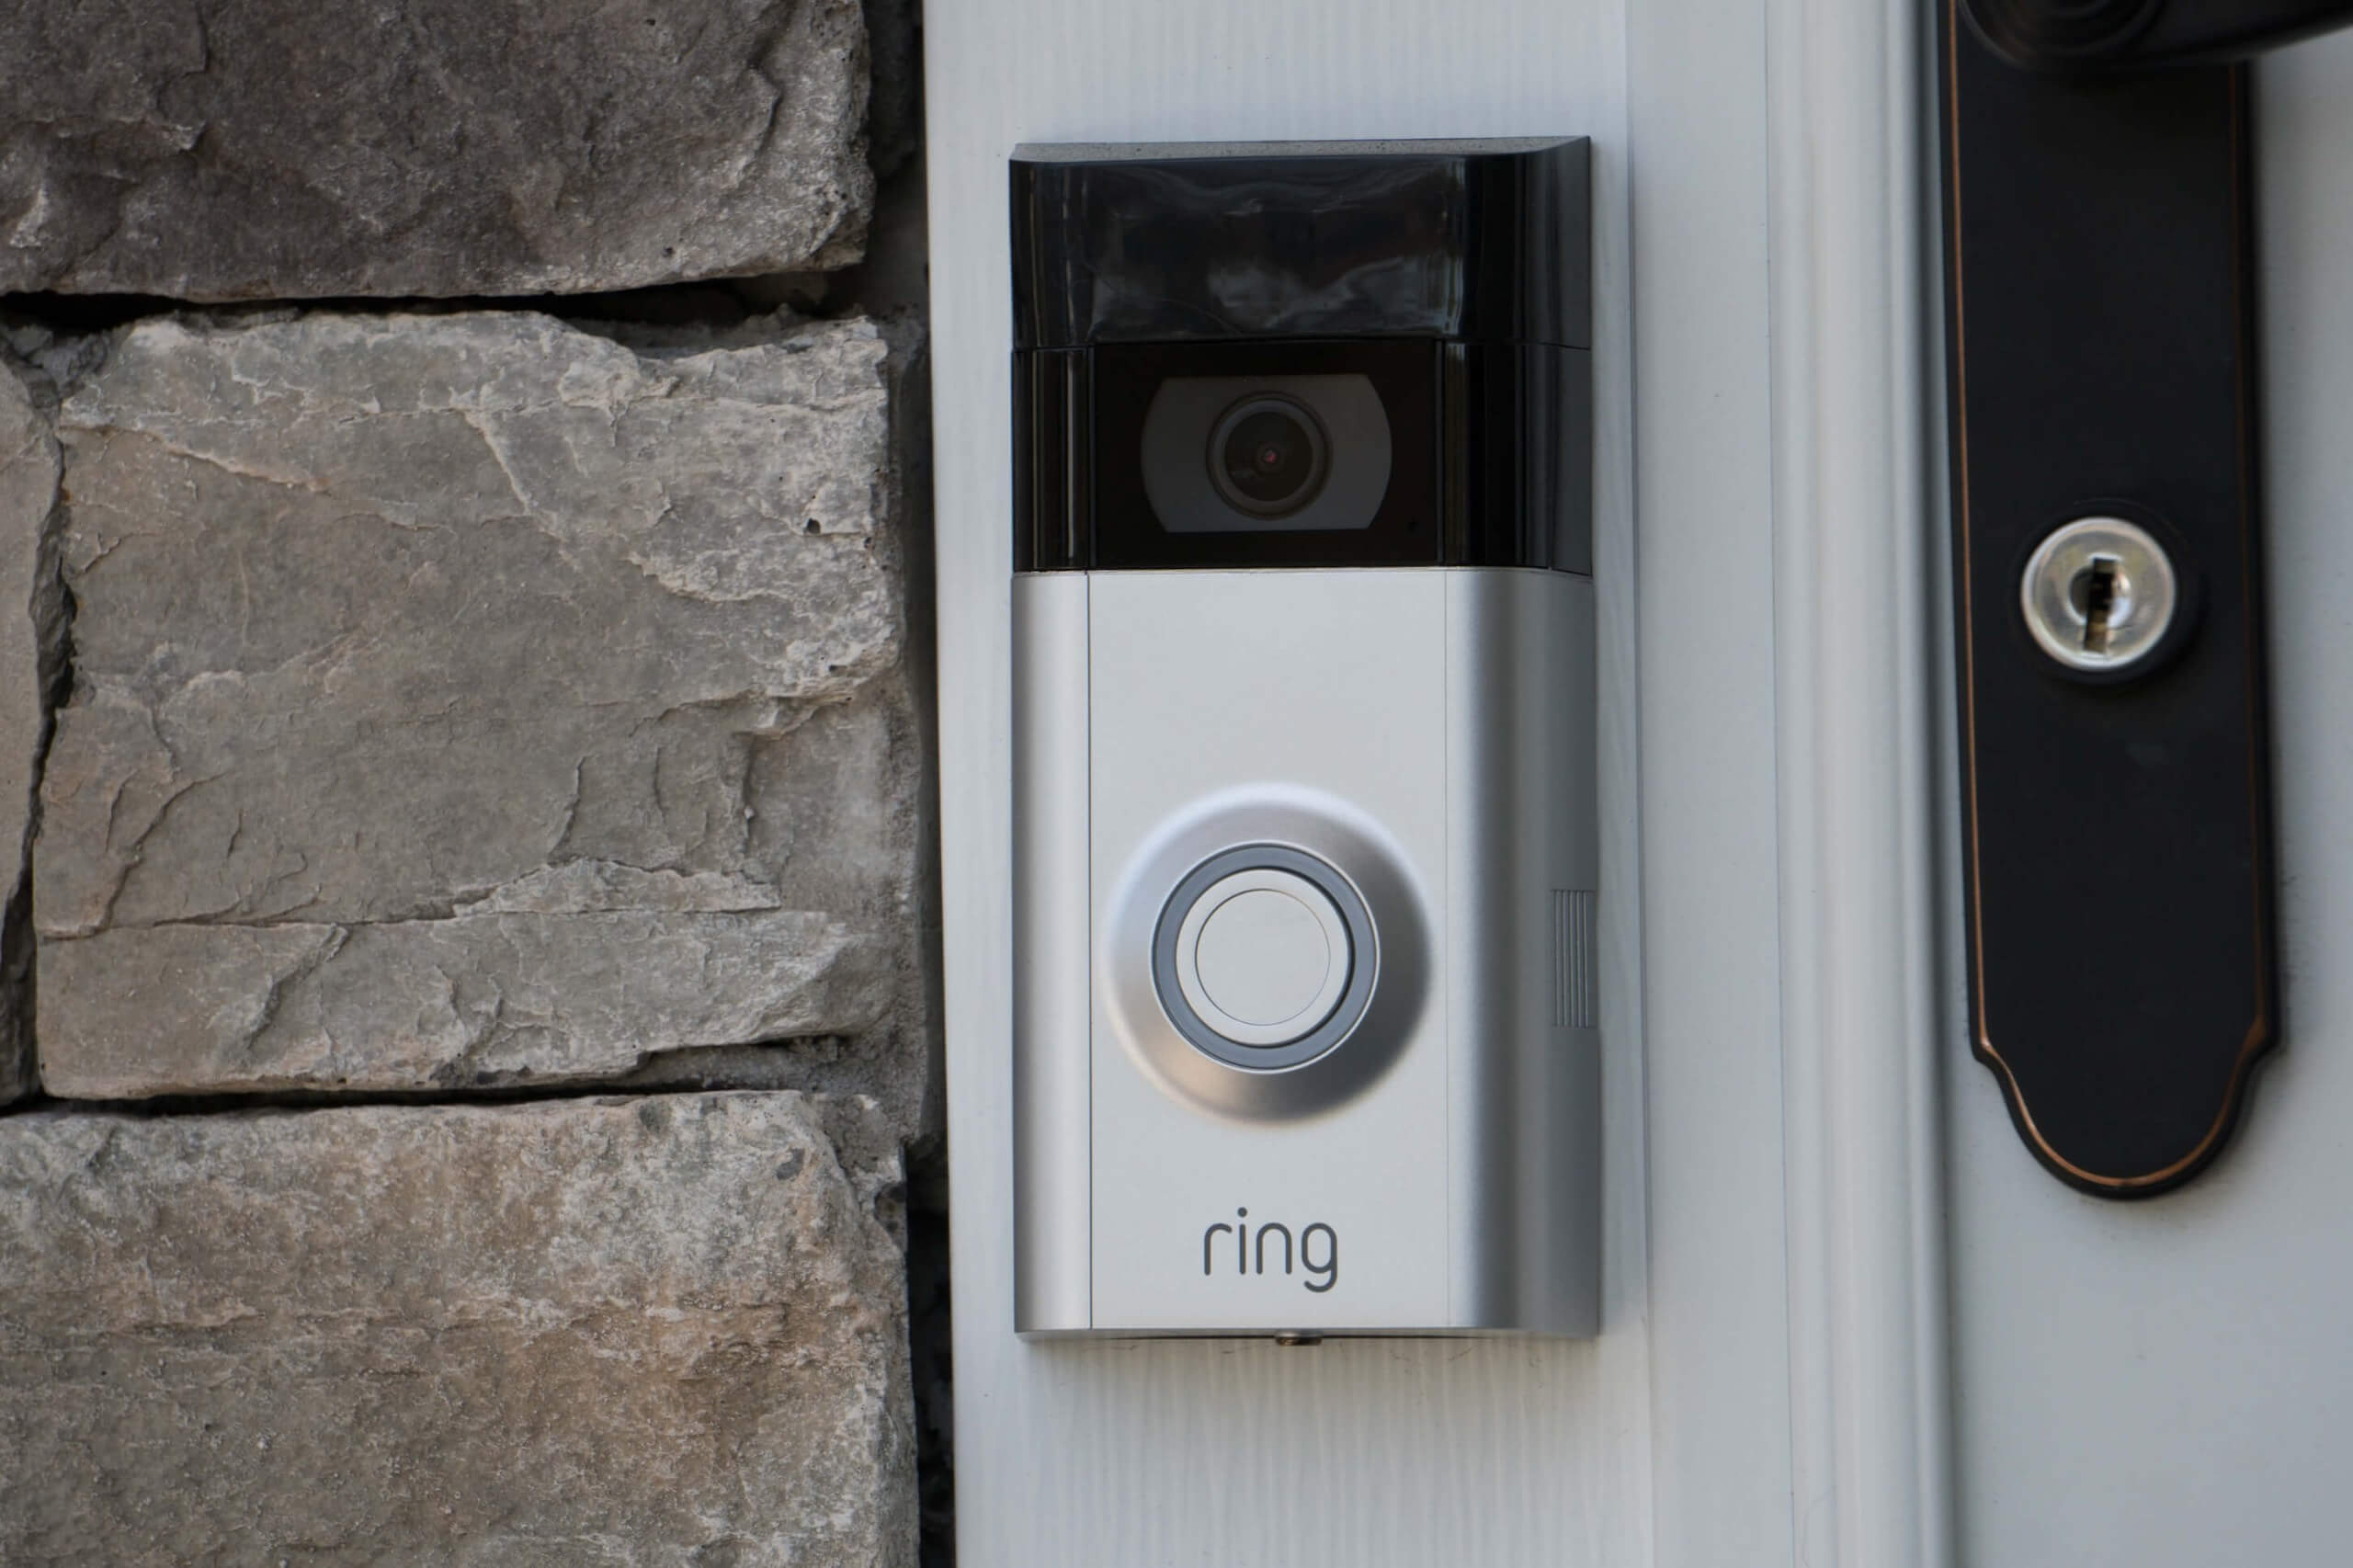 Police can request Ring videos up to 45 days old and keep them indefinitely